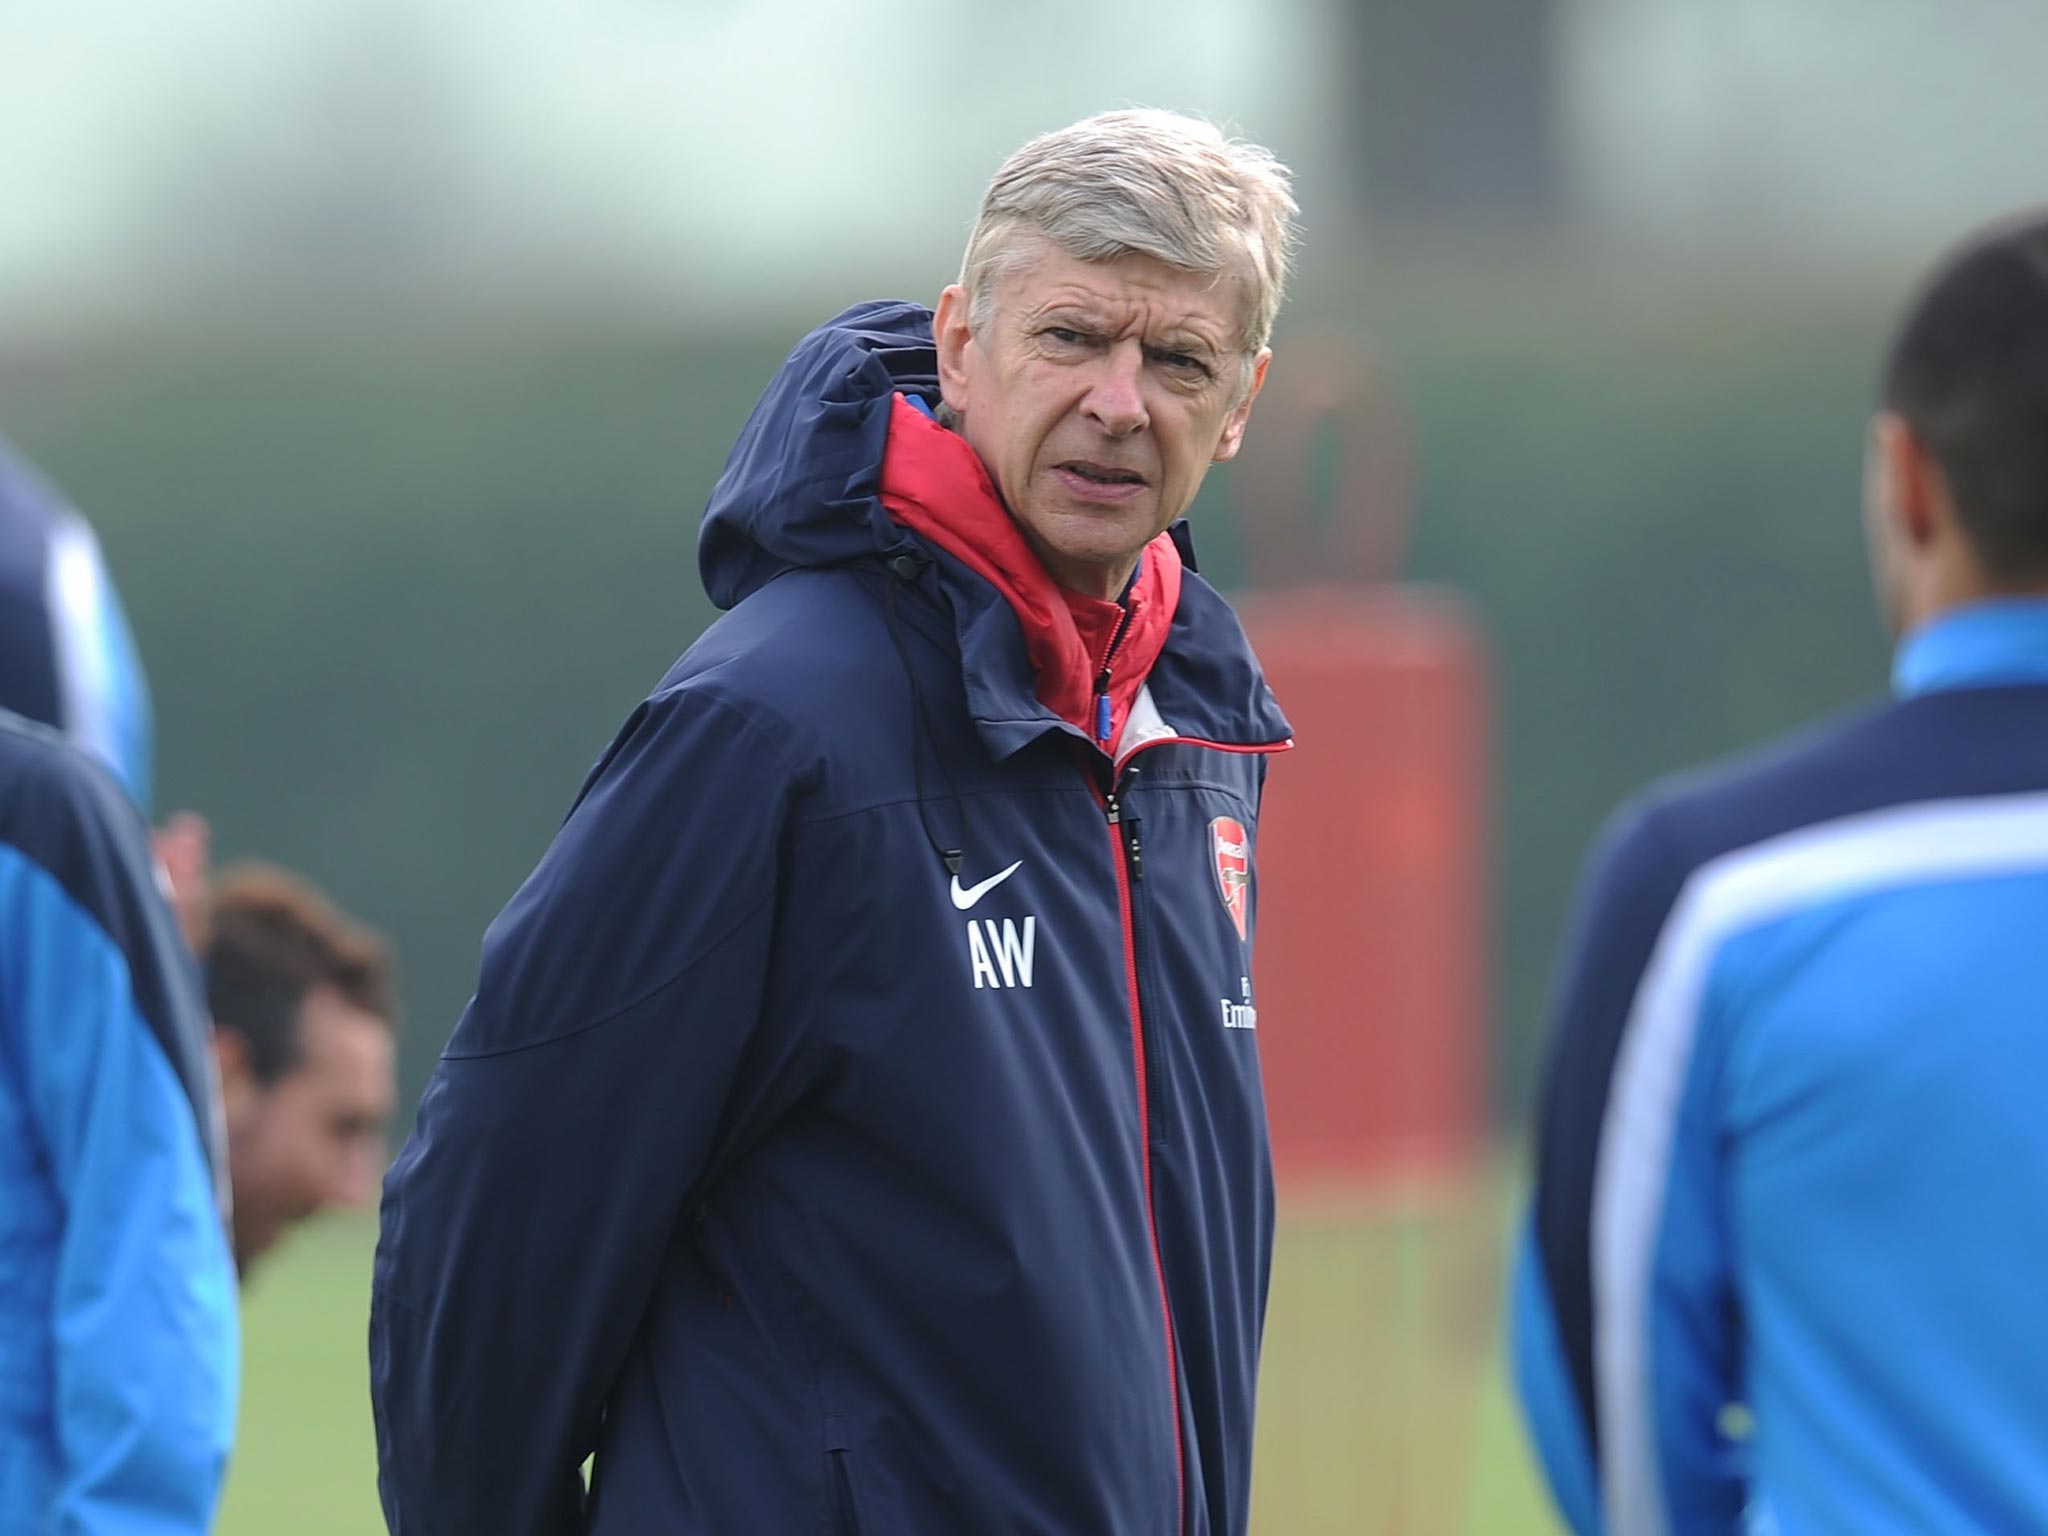 Manager Arsène Wenger yesterday said that his Arsenal side has plenty of experience